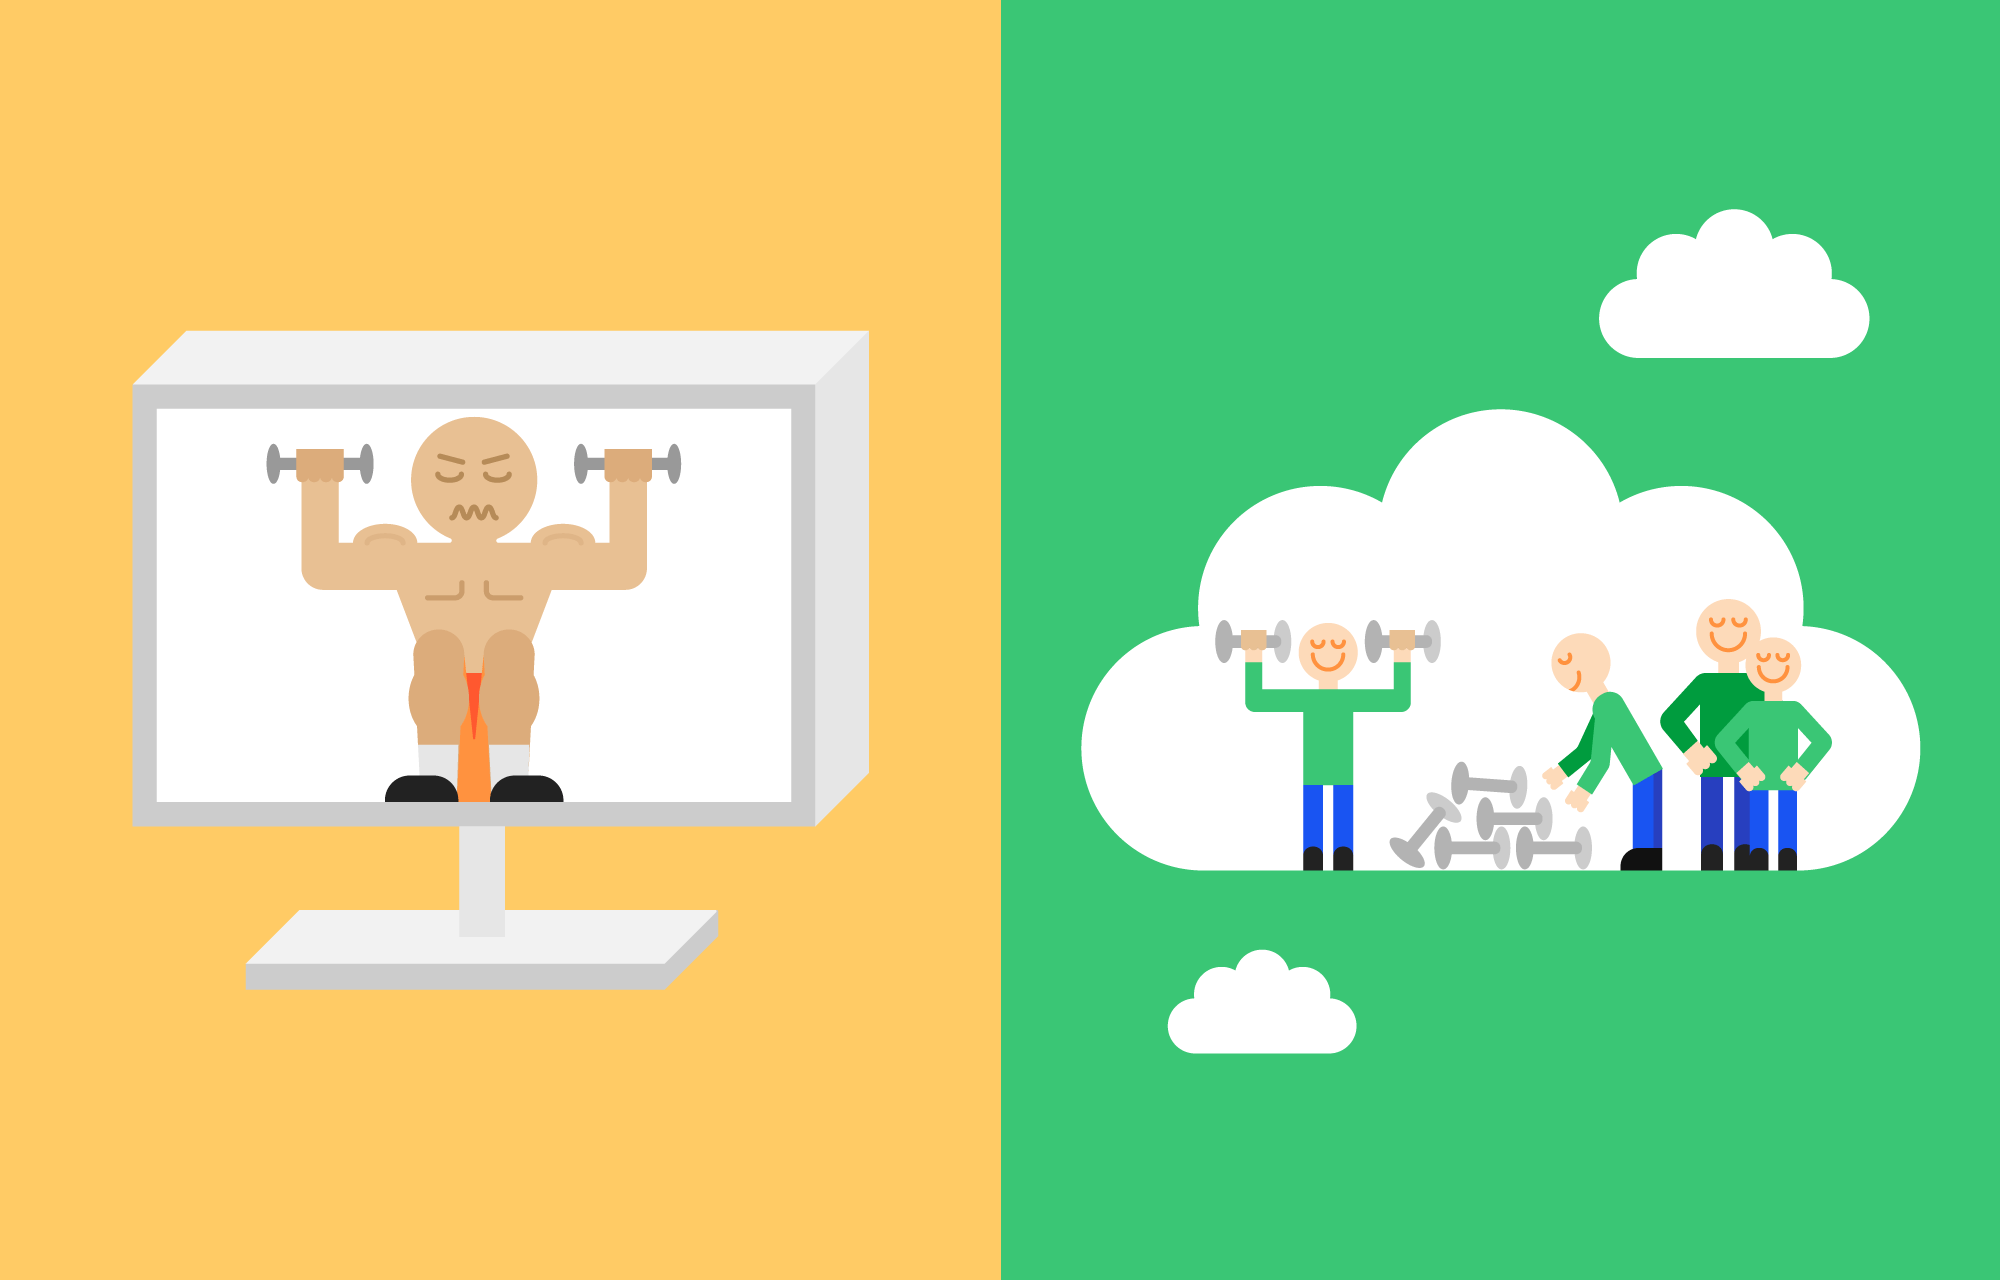 Why run your website in the cloud?